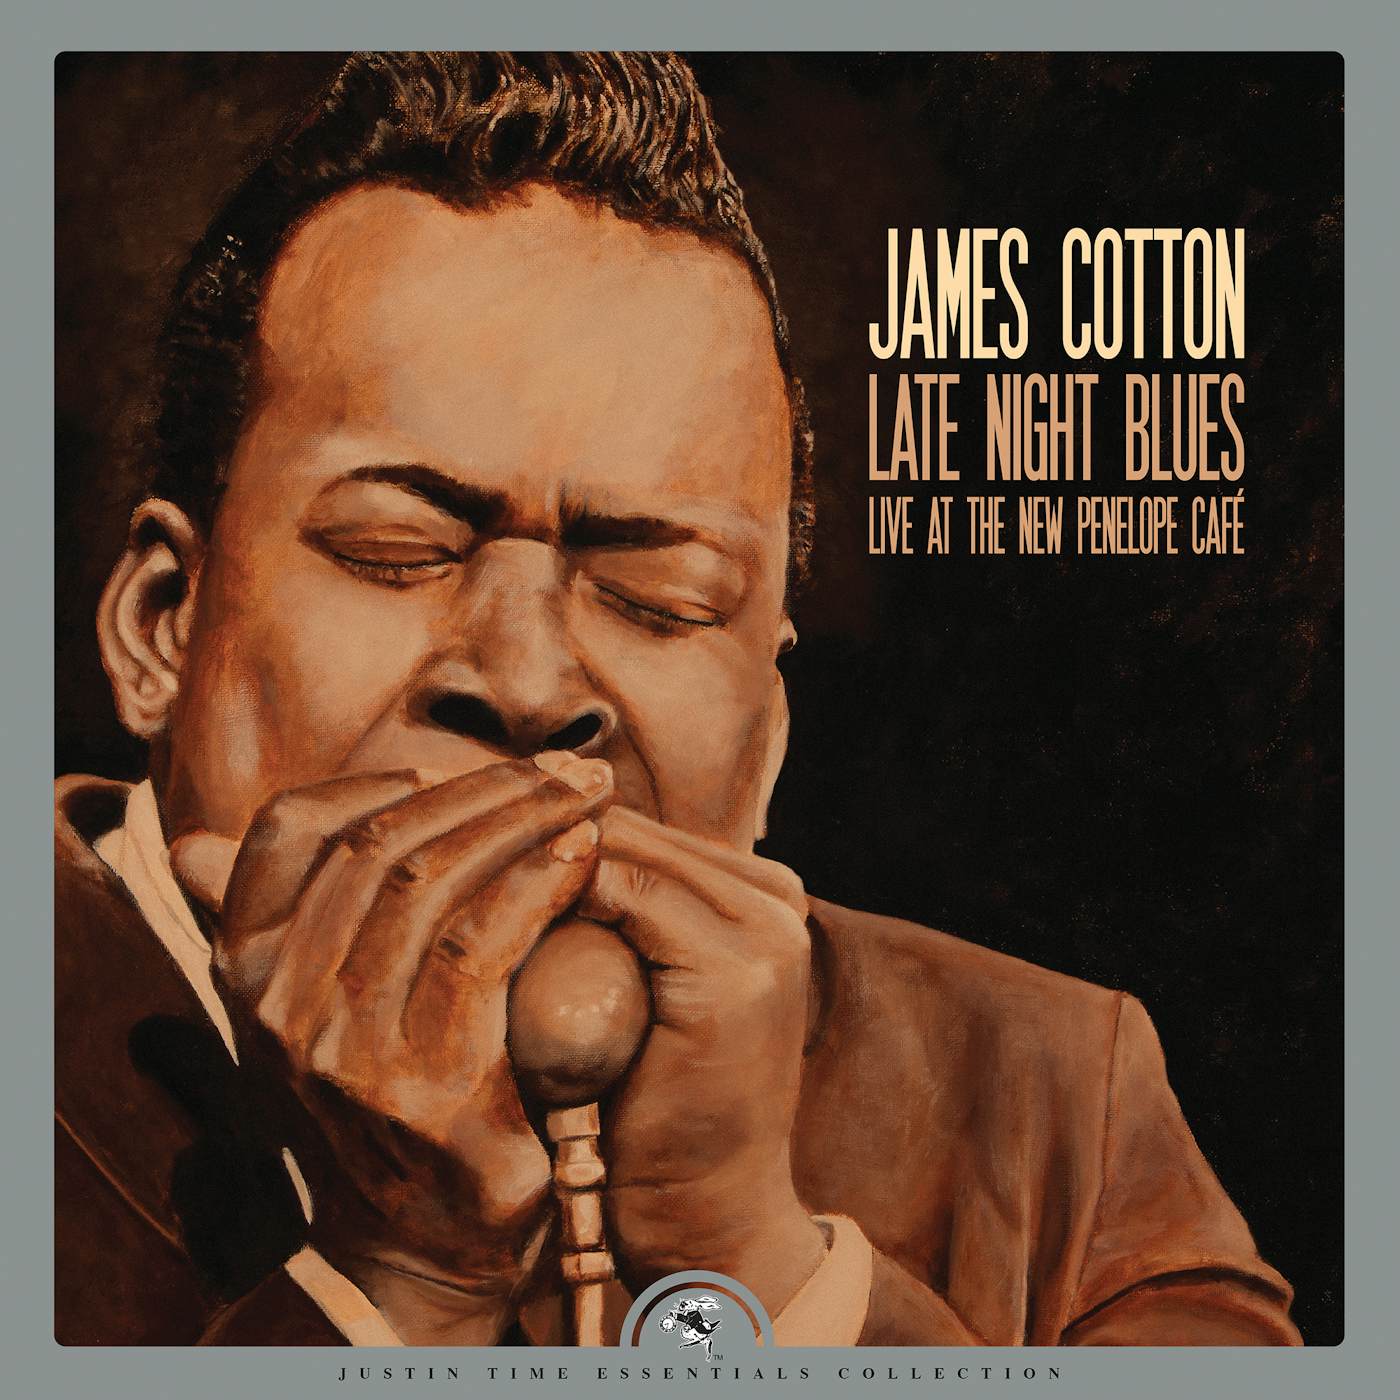 James Cotton LATE NIGHT BLUES: LIVE AT THE NEW PENELOPE CAFE Vinyl Record